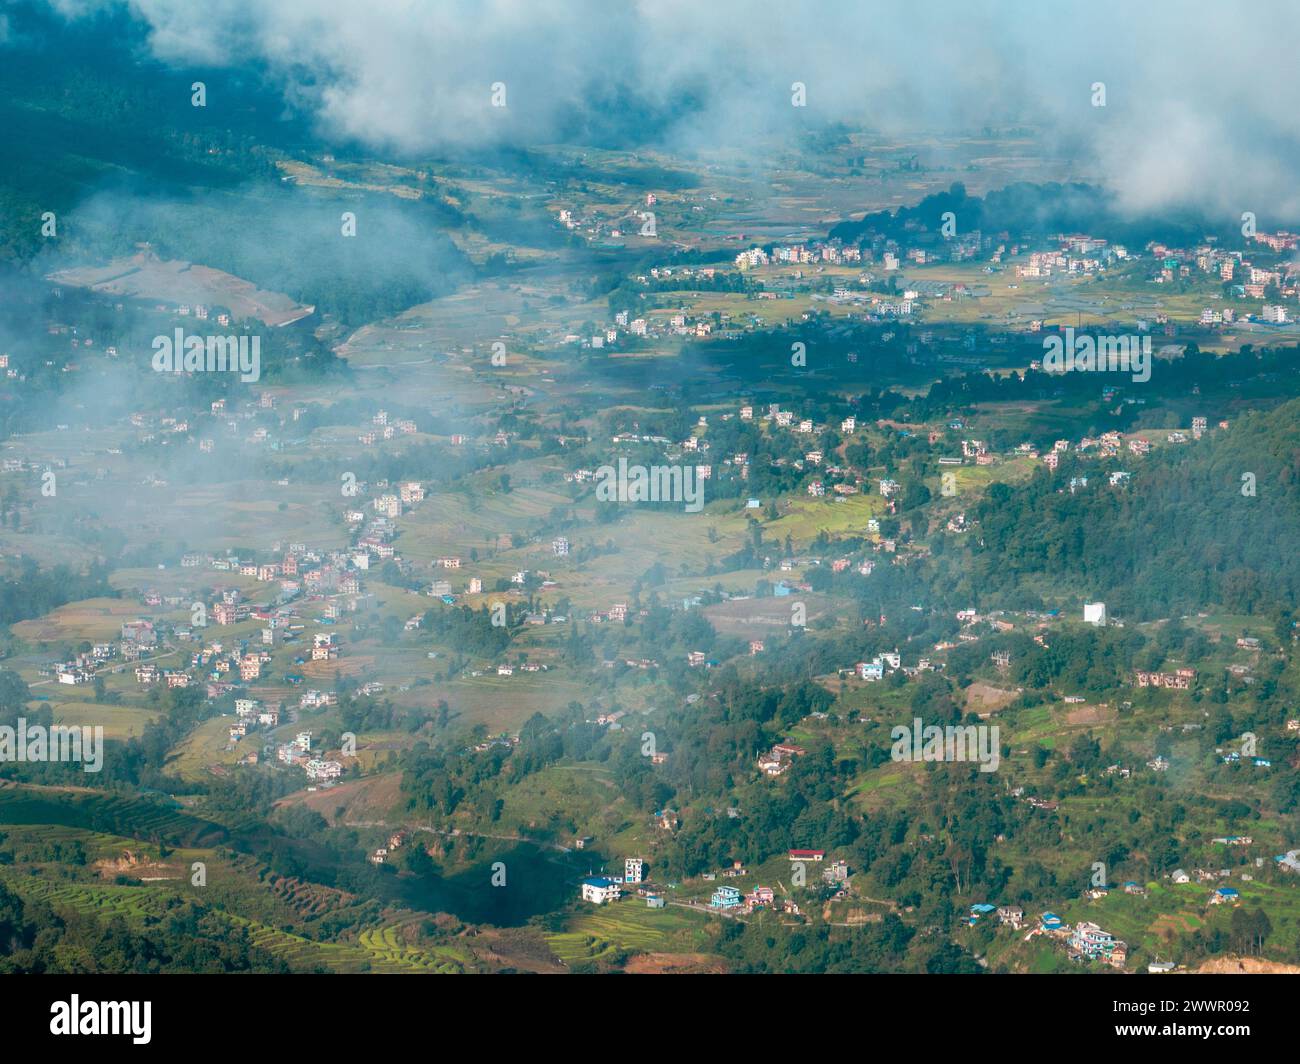 Aerial view of some Nepalese villages surrounded by nature and rice fields in the valleys at the foot of the Himalayan mountain, Nagarkot, Nepal Stock Photo